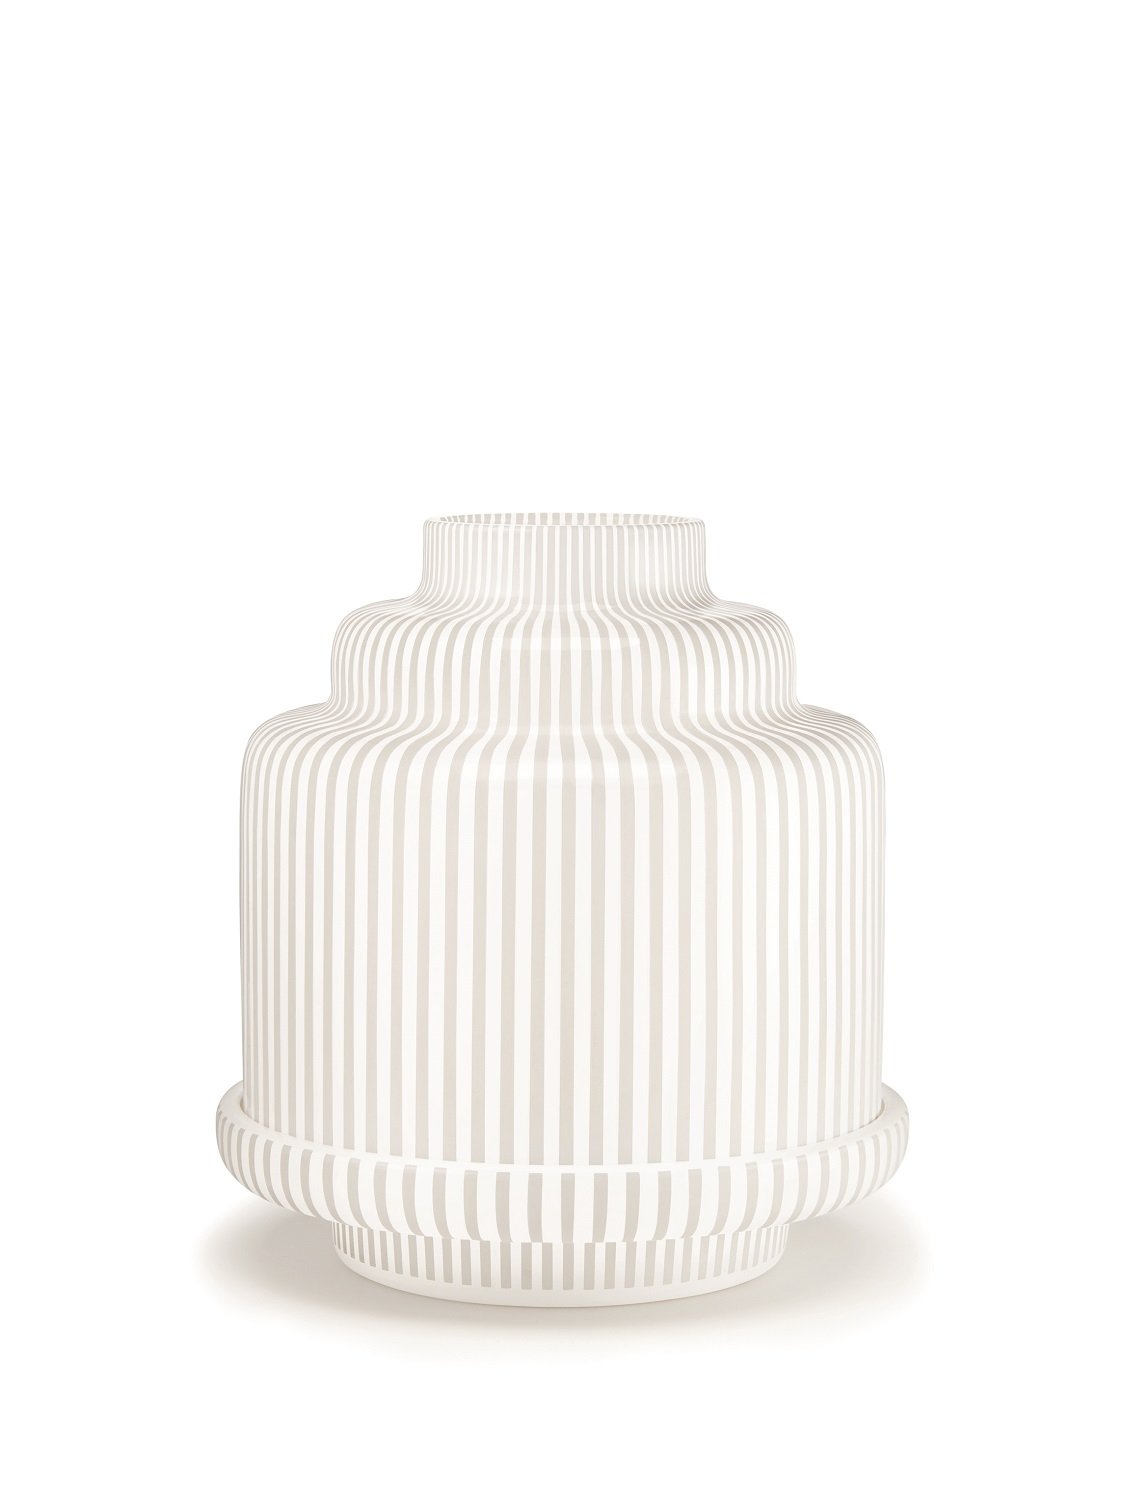 diptyque-pyramide-candle-holder-white-DECO01377-1.jpg